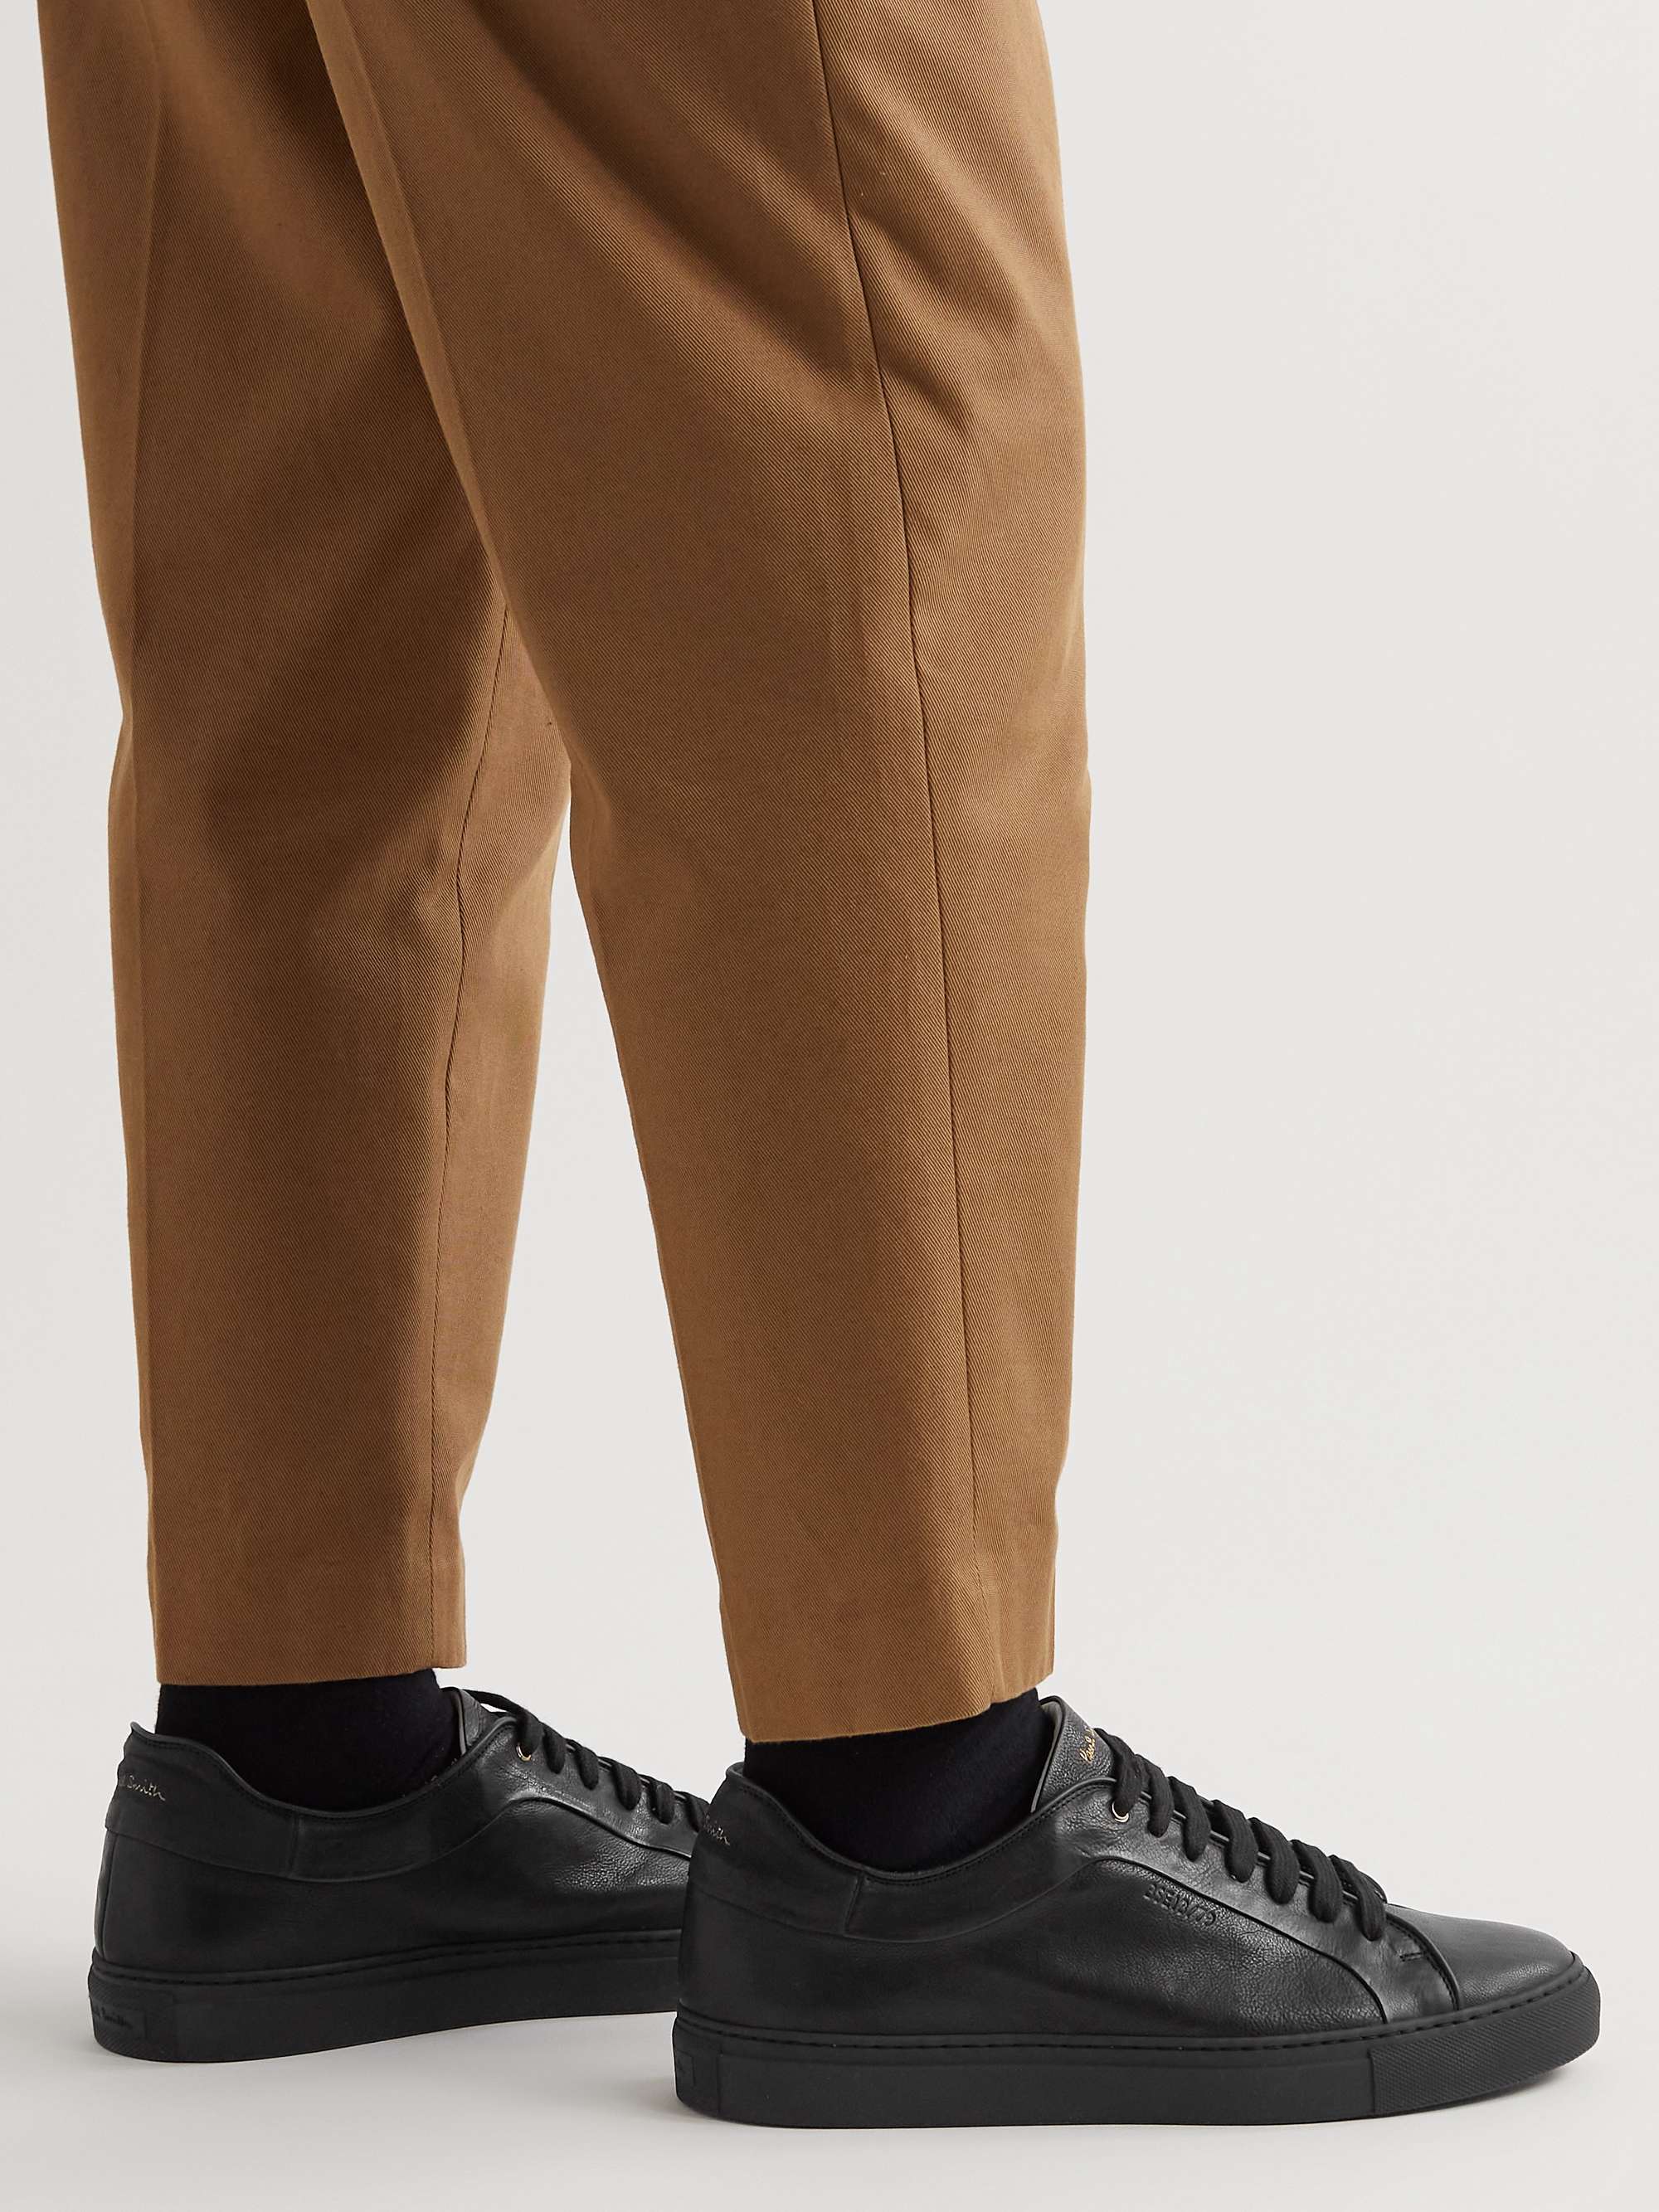 PAUL SMITH Basso ECO Leather Sneakers for Men | MR PORTER